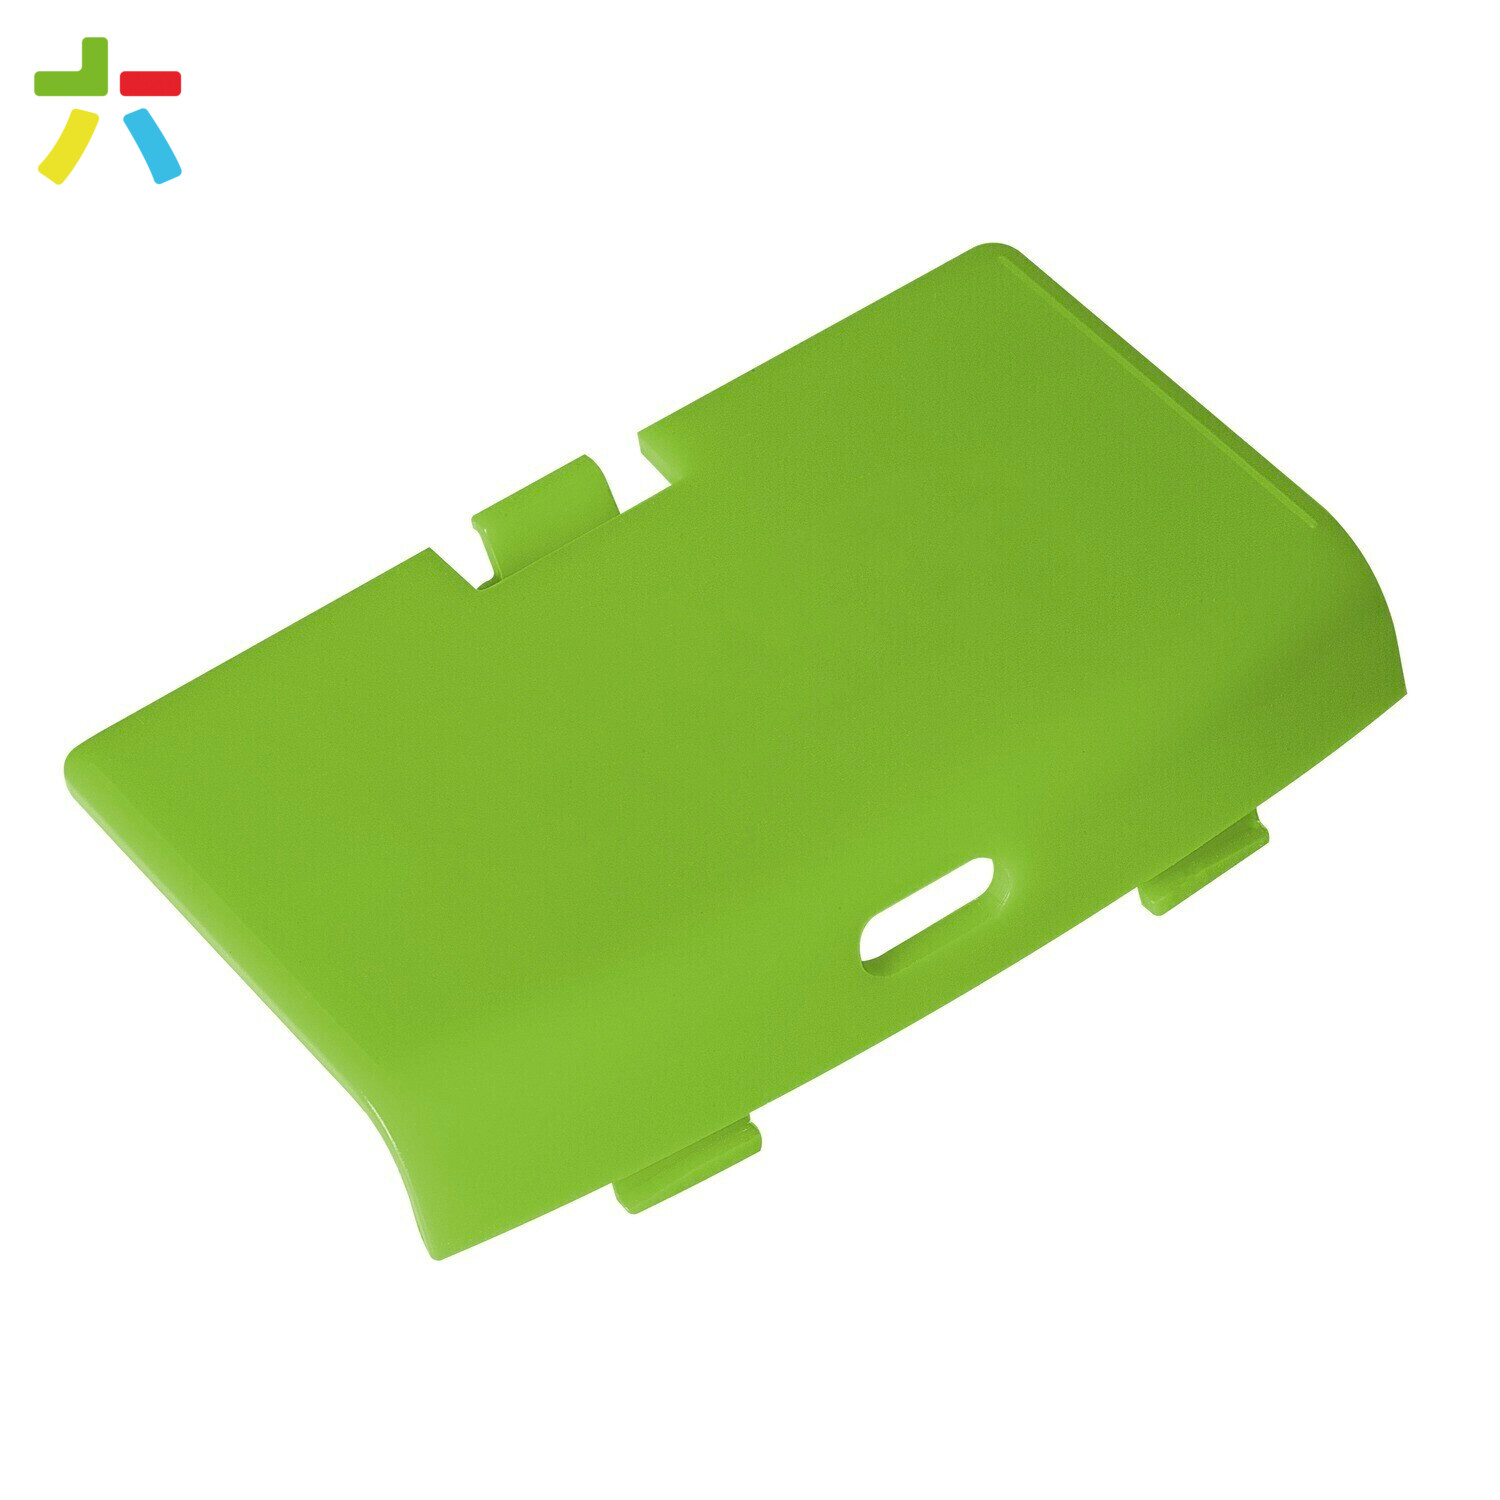 Game Boy Advance USB-C Battery Cover (Solid Green)